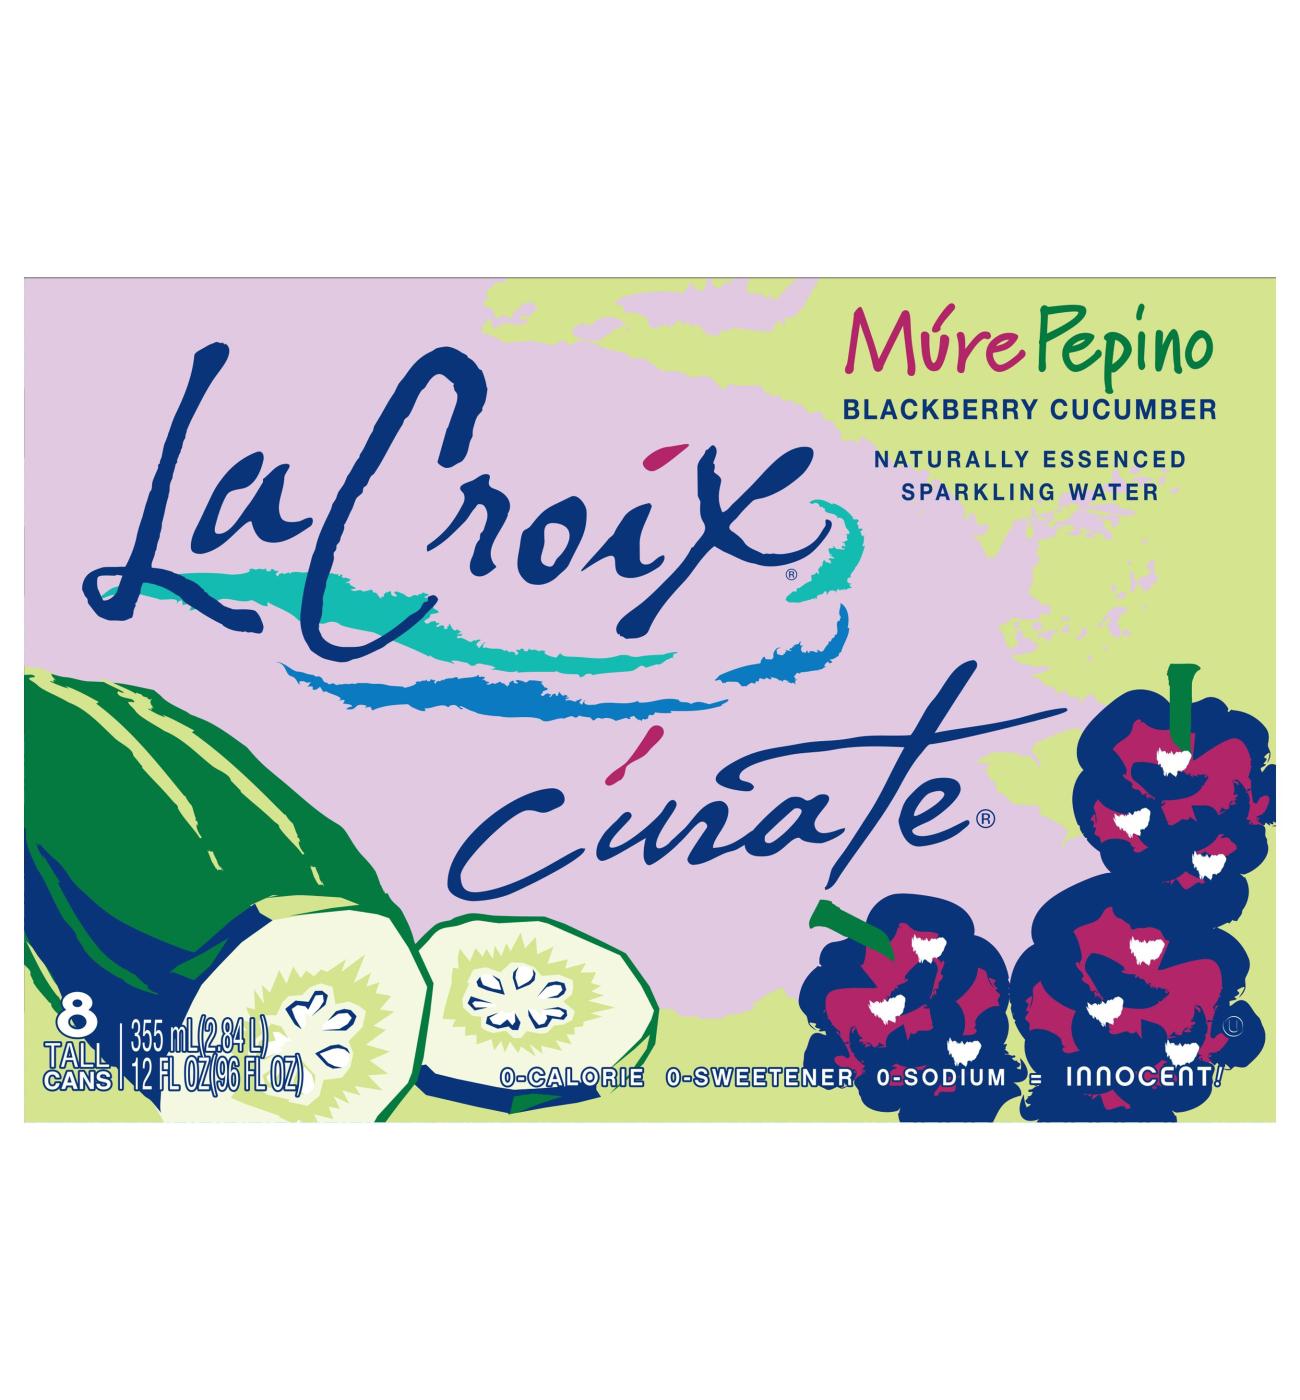 LaCroix Curate Mure Pepino Sparkling Water 12 oz Cans; image 2 of 2